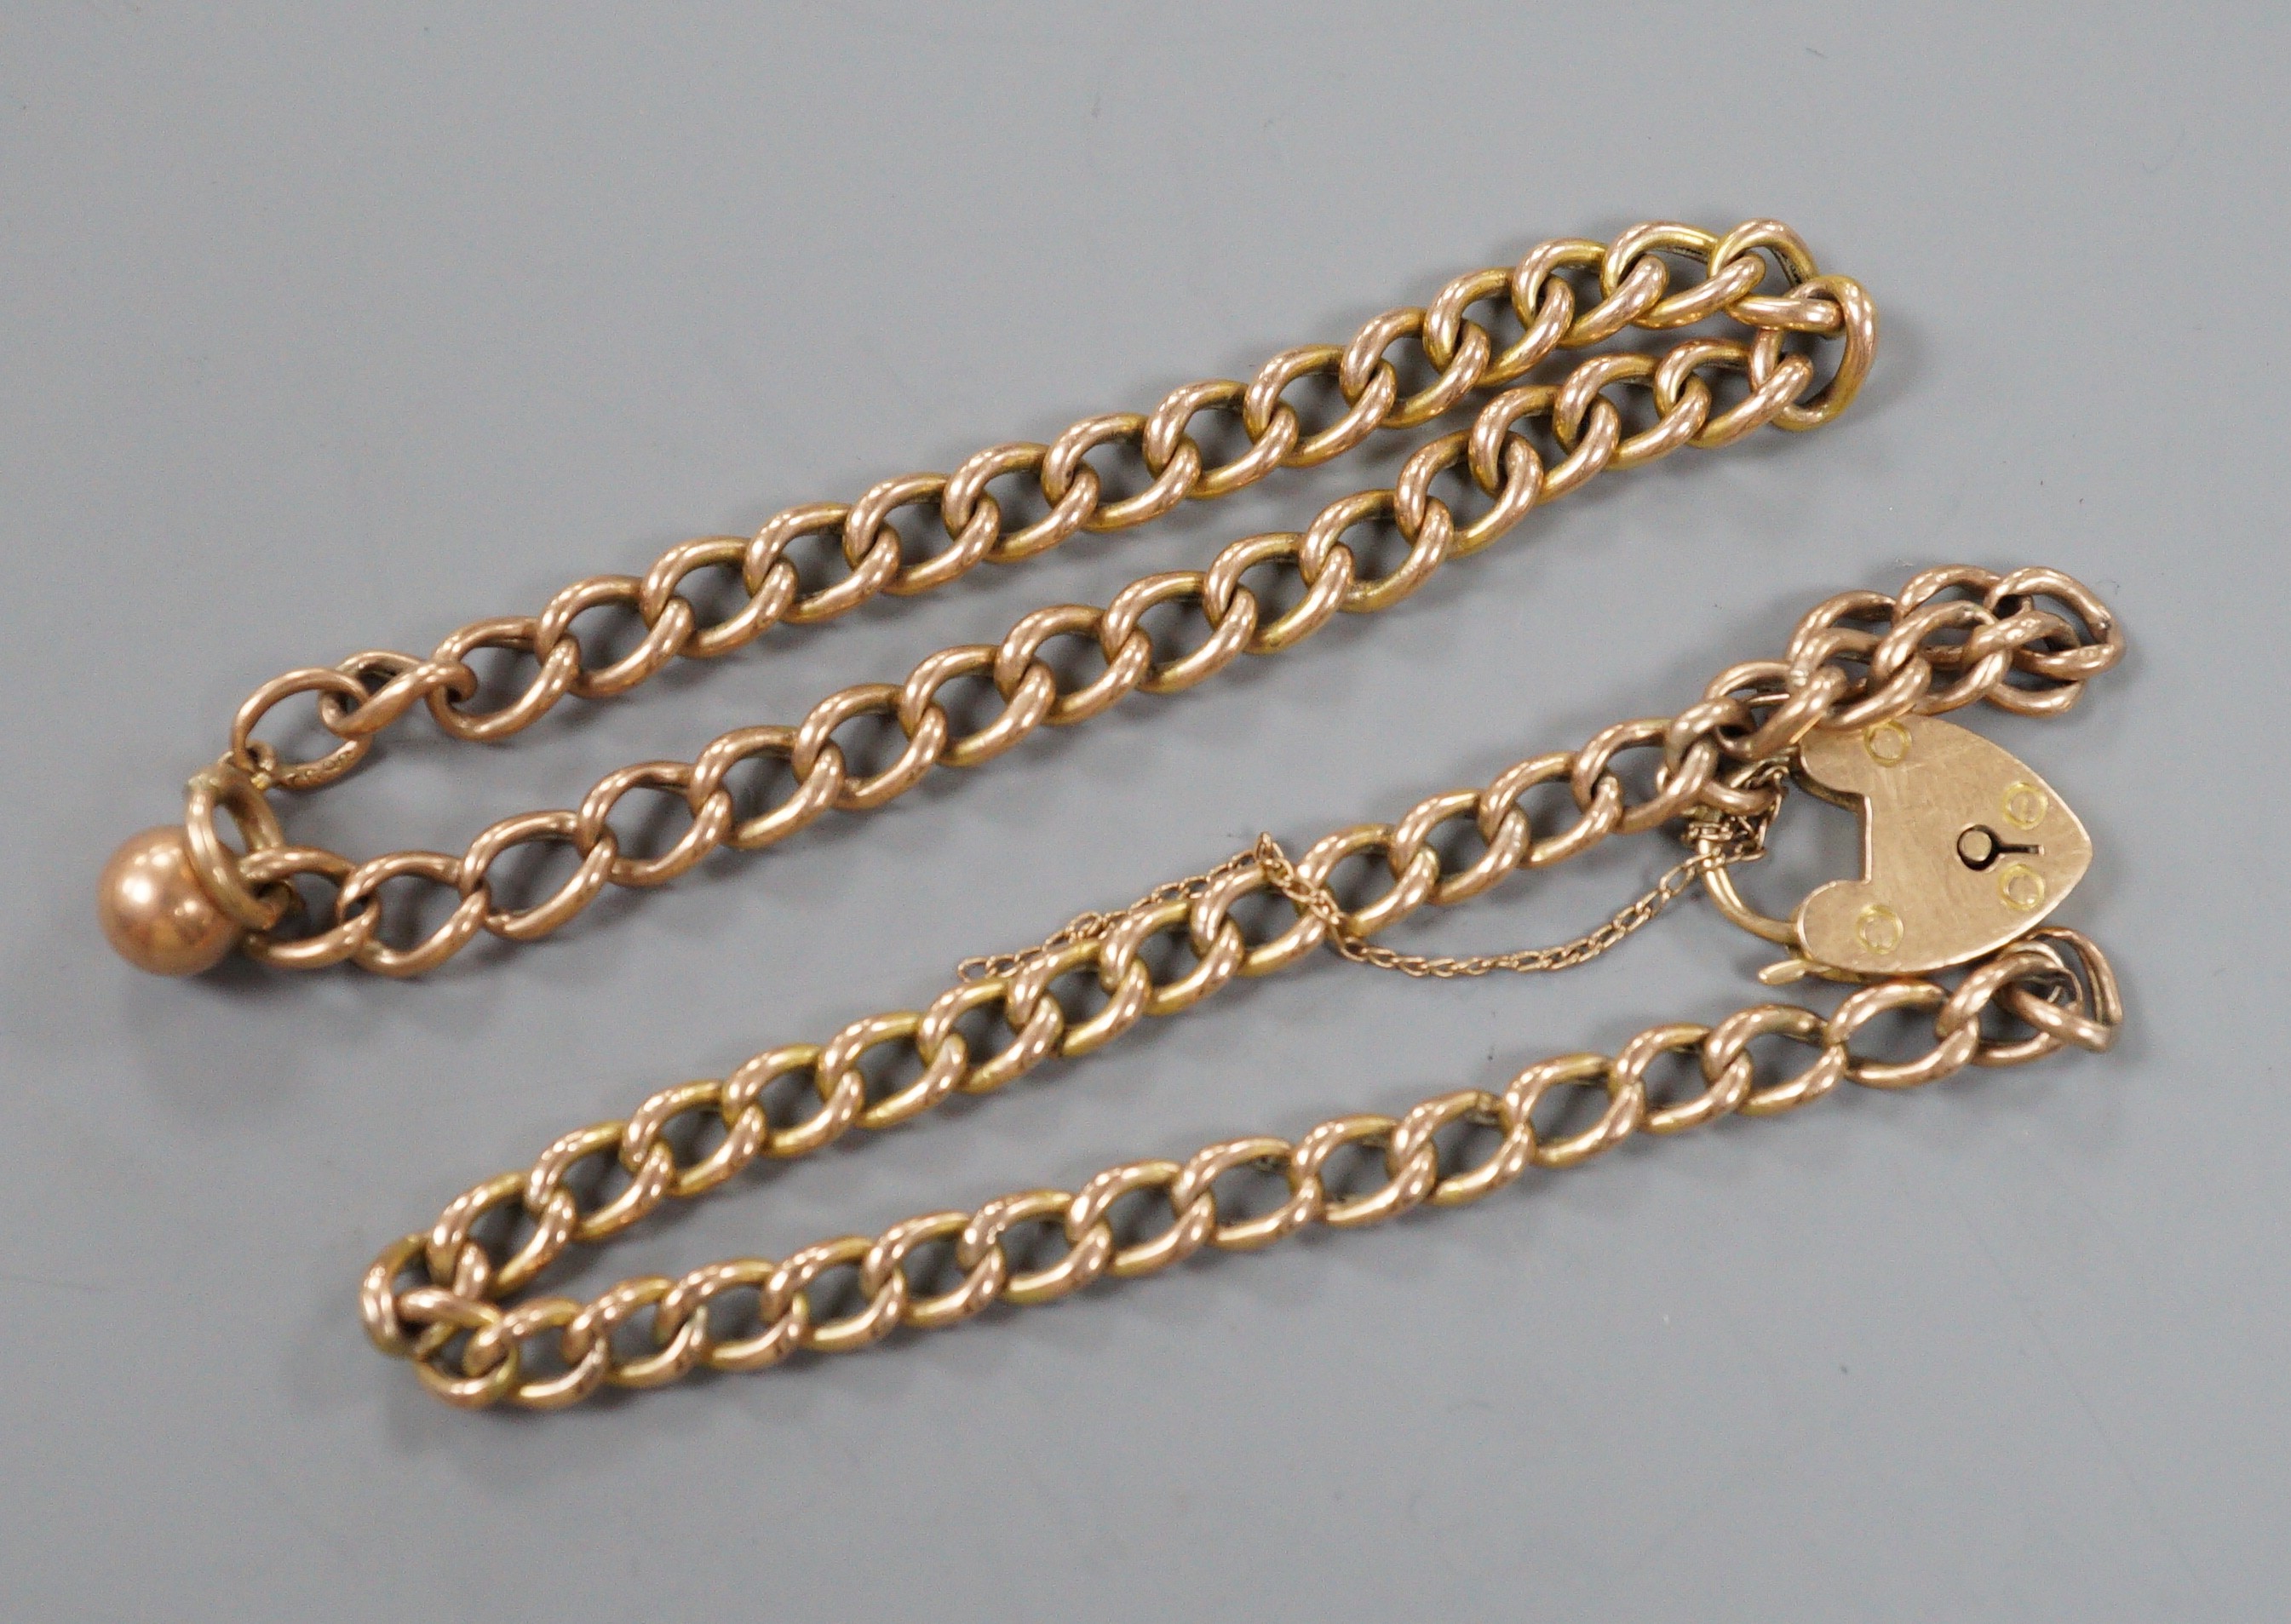 A 9ct curb link bracelet and a yellow metal curb link bracelet with 15ct clasp, gross weight 10.1 grams.